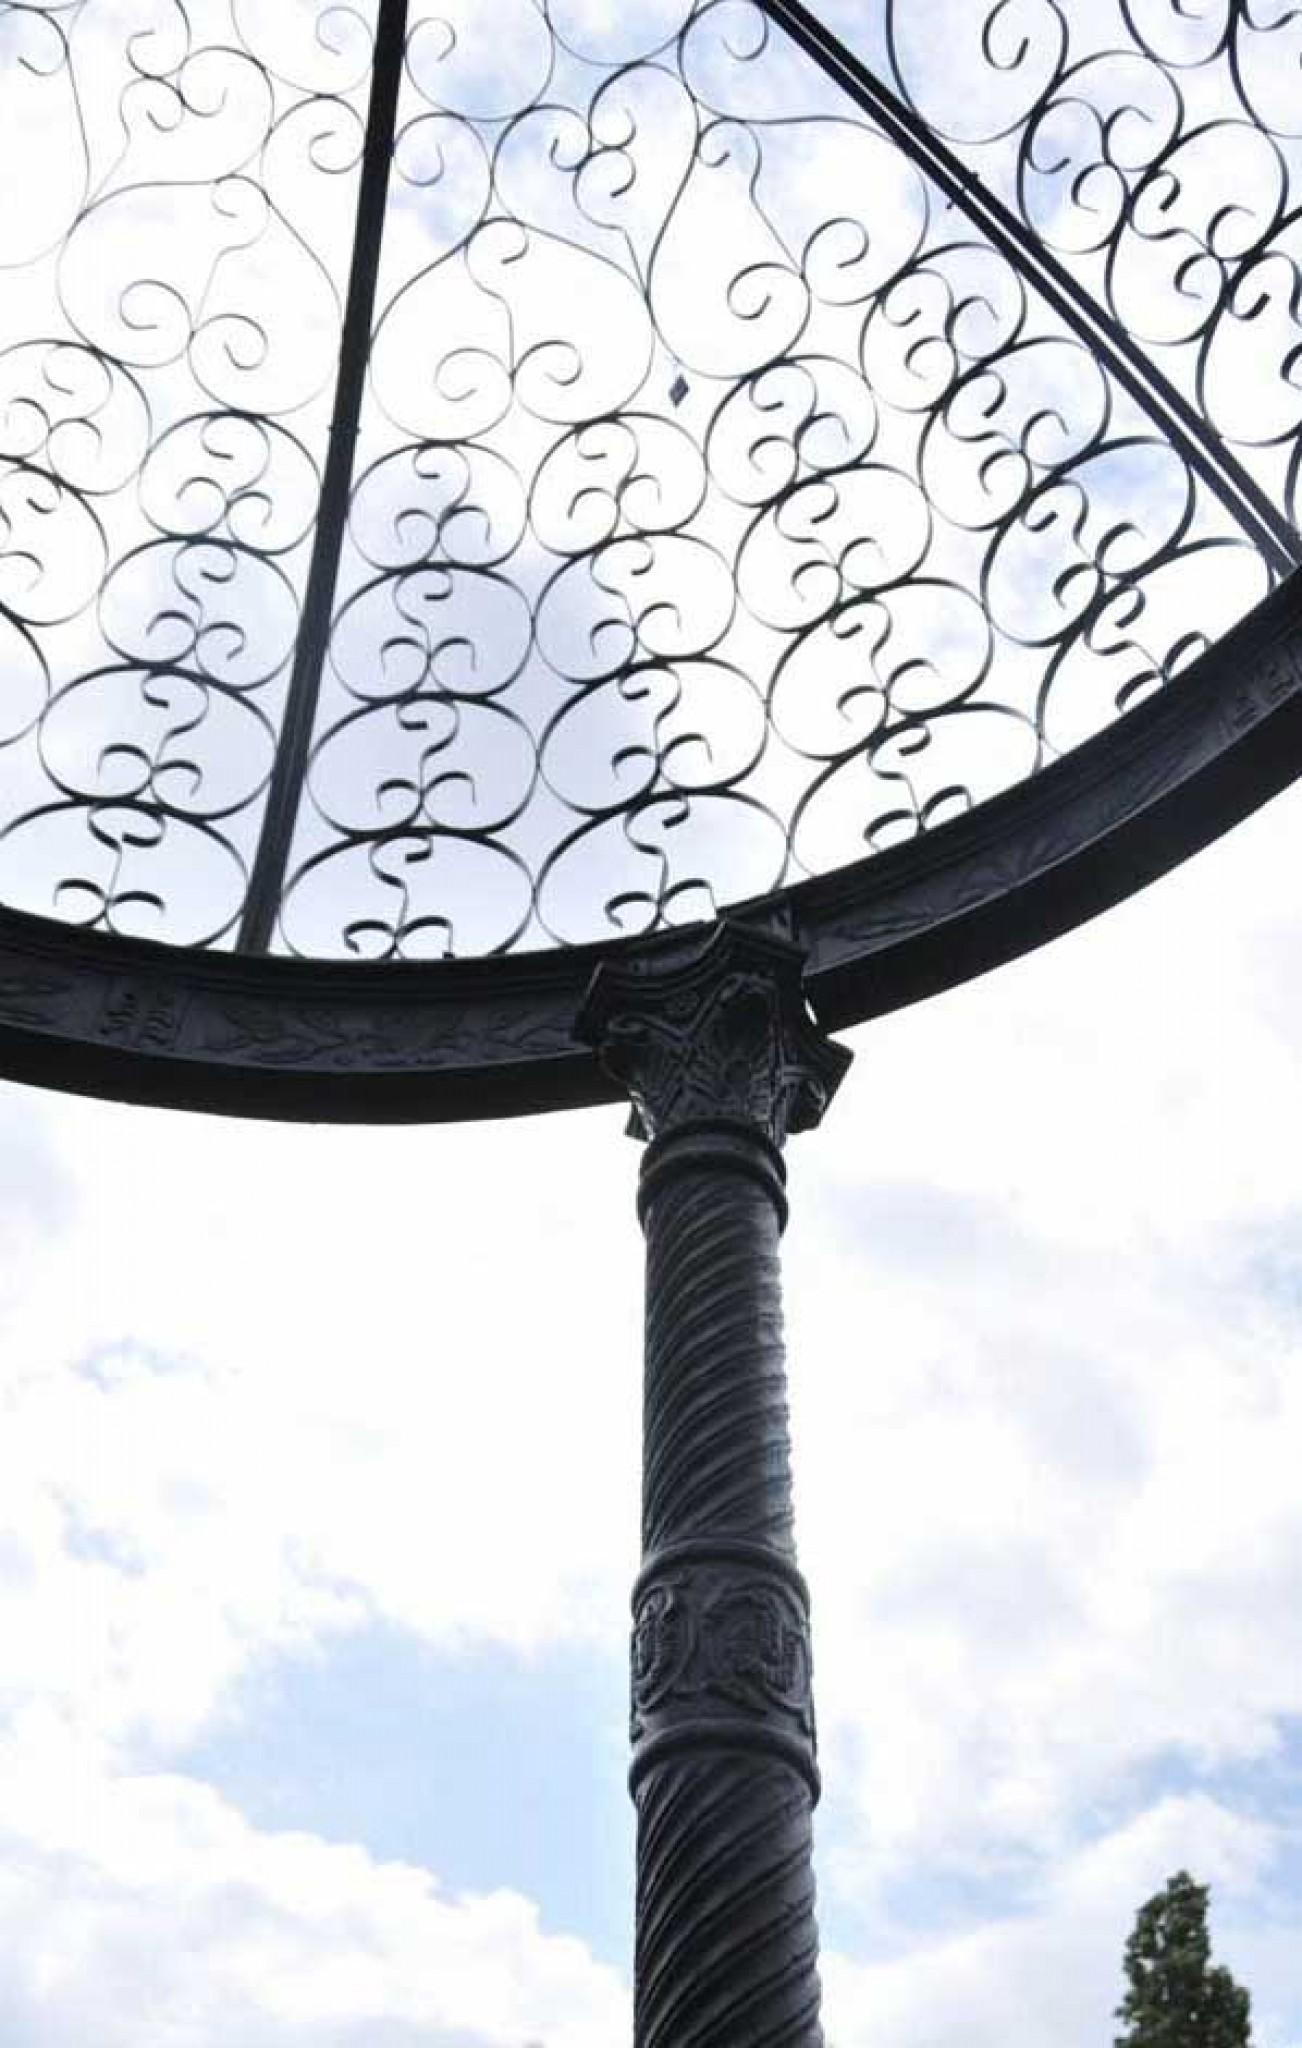 Large Victorian Cast Iron Gazebo Architectural Garden Seat Dome Canopy In Good Condition For Sale In Potters Bar, GB